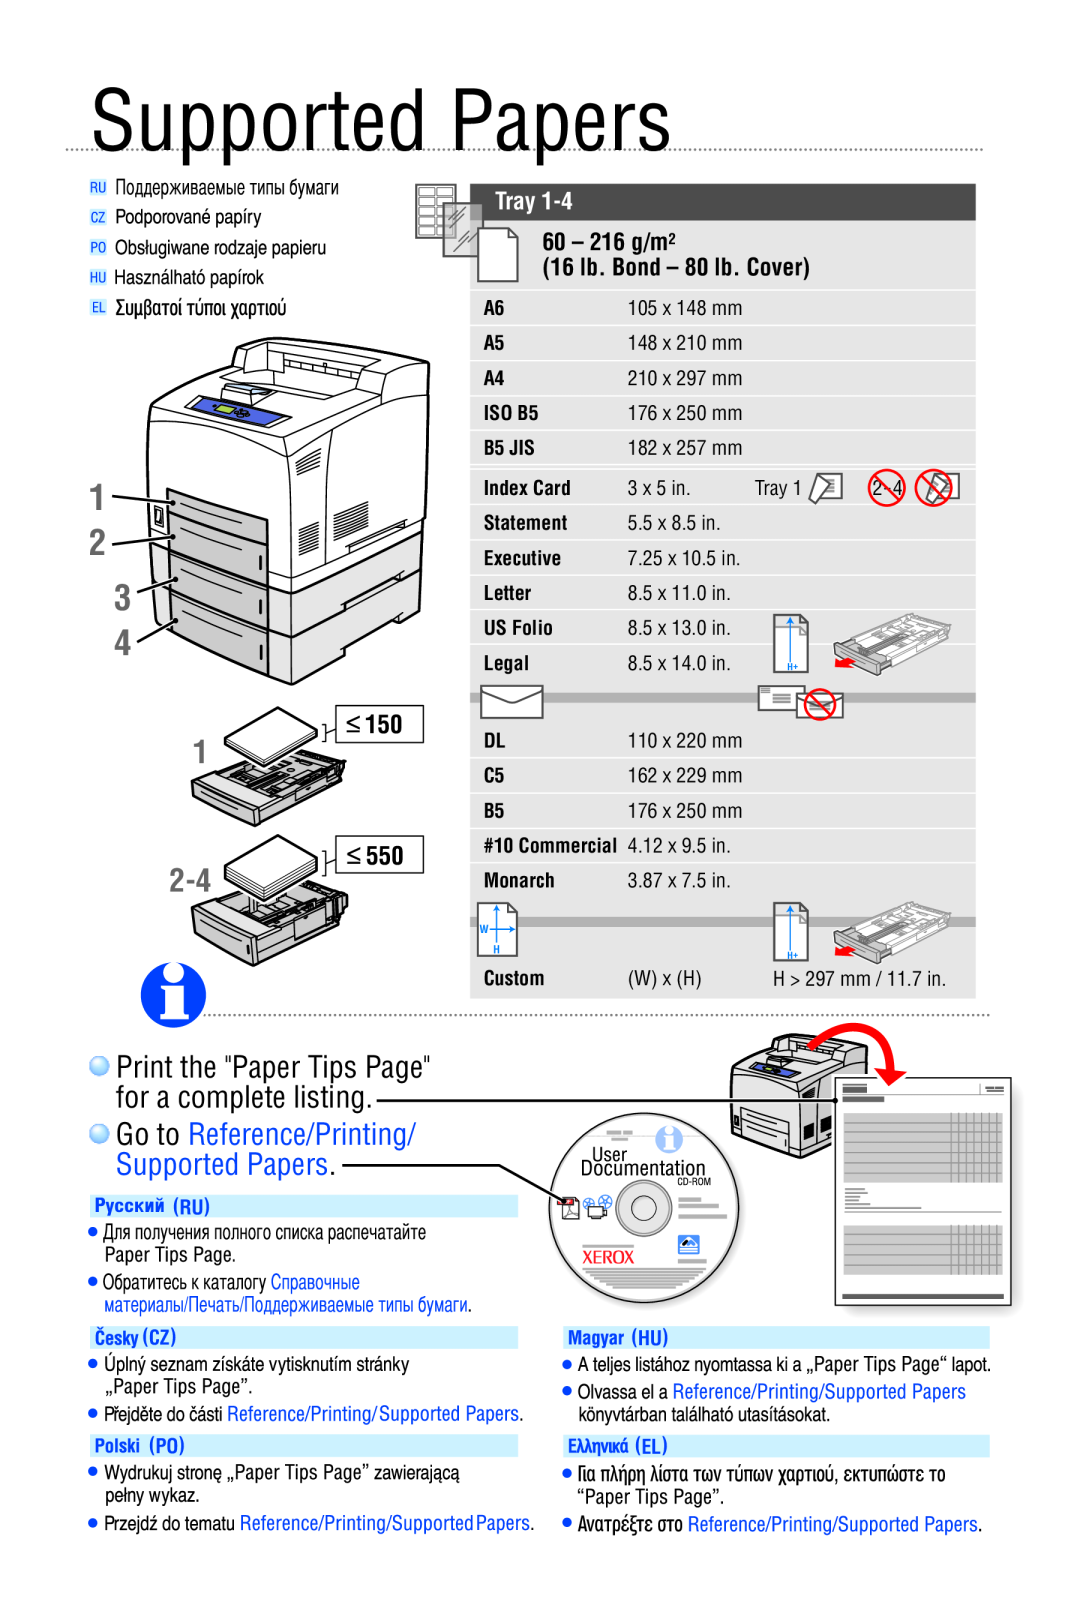 Xerox 4500 Supported Papers, Print the Paper Tips Page for a complete listing, Tray, ISO B5, B5 JIS, Index Card, Statement 